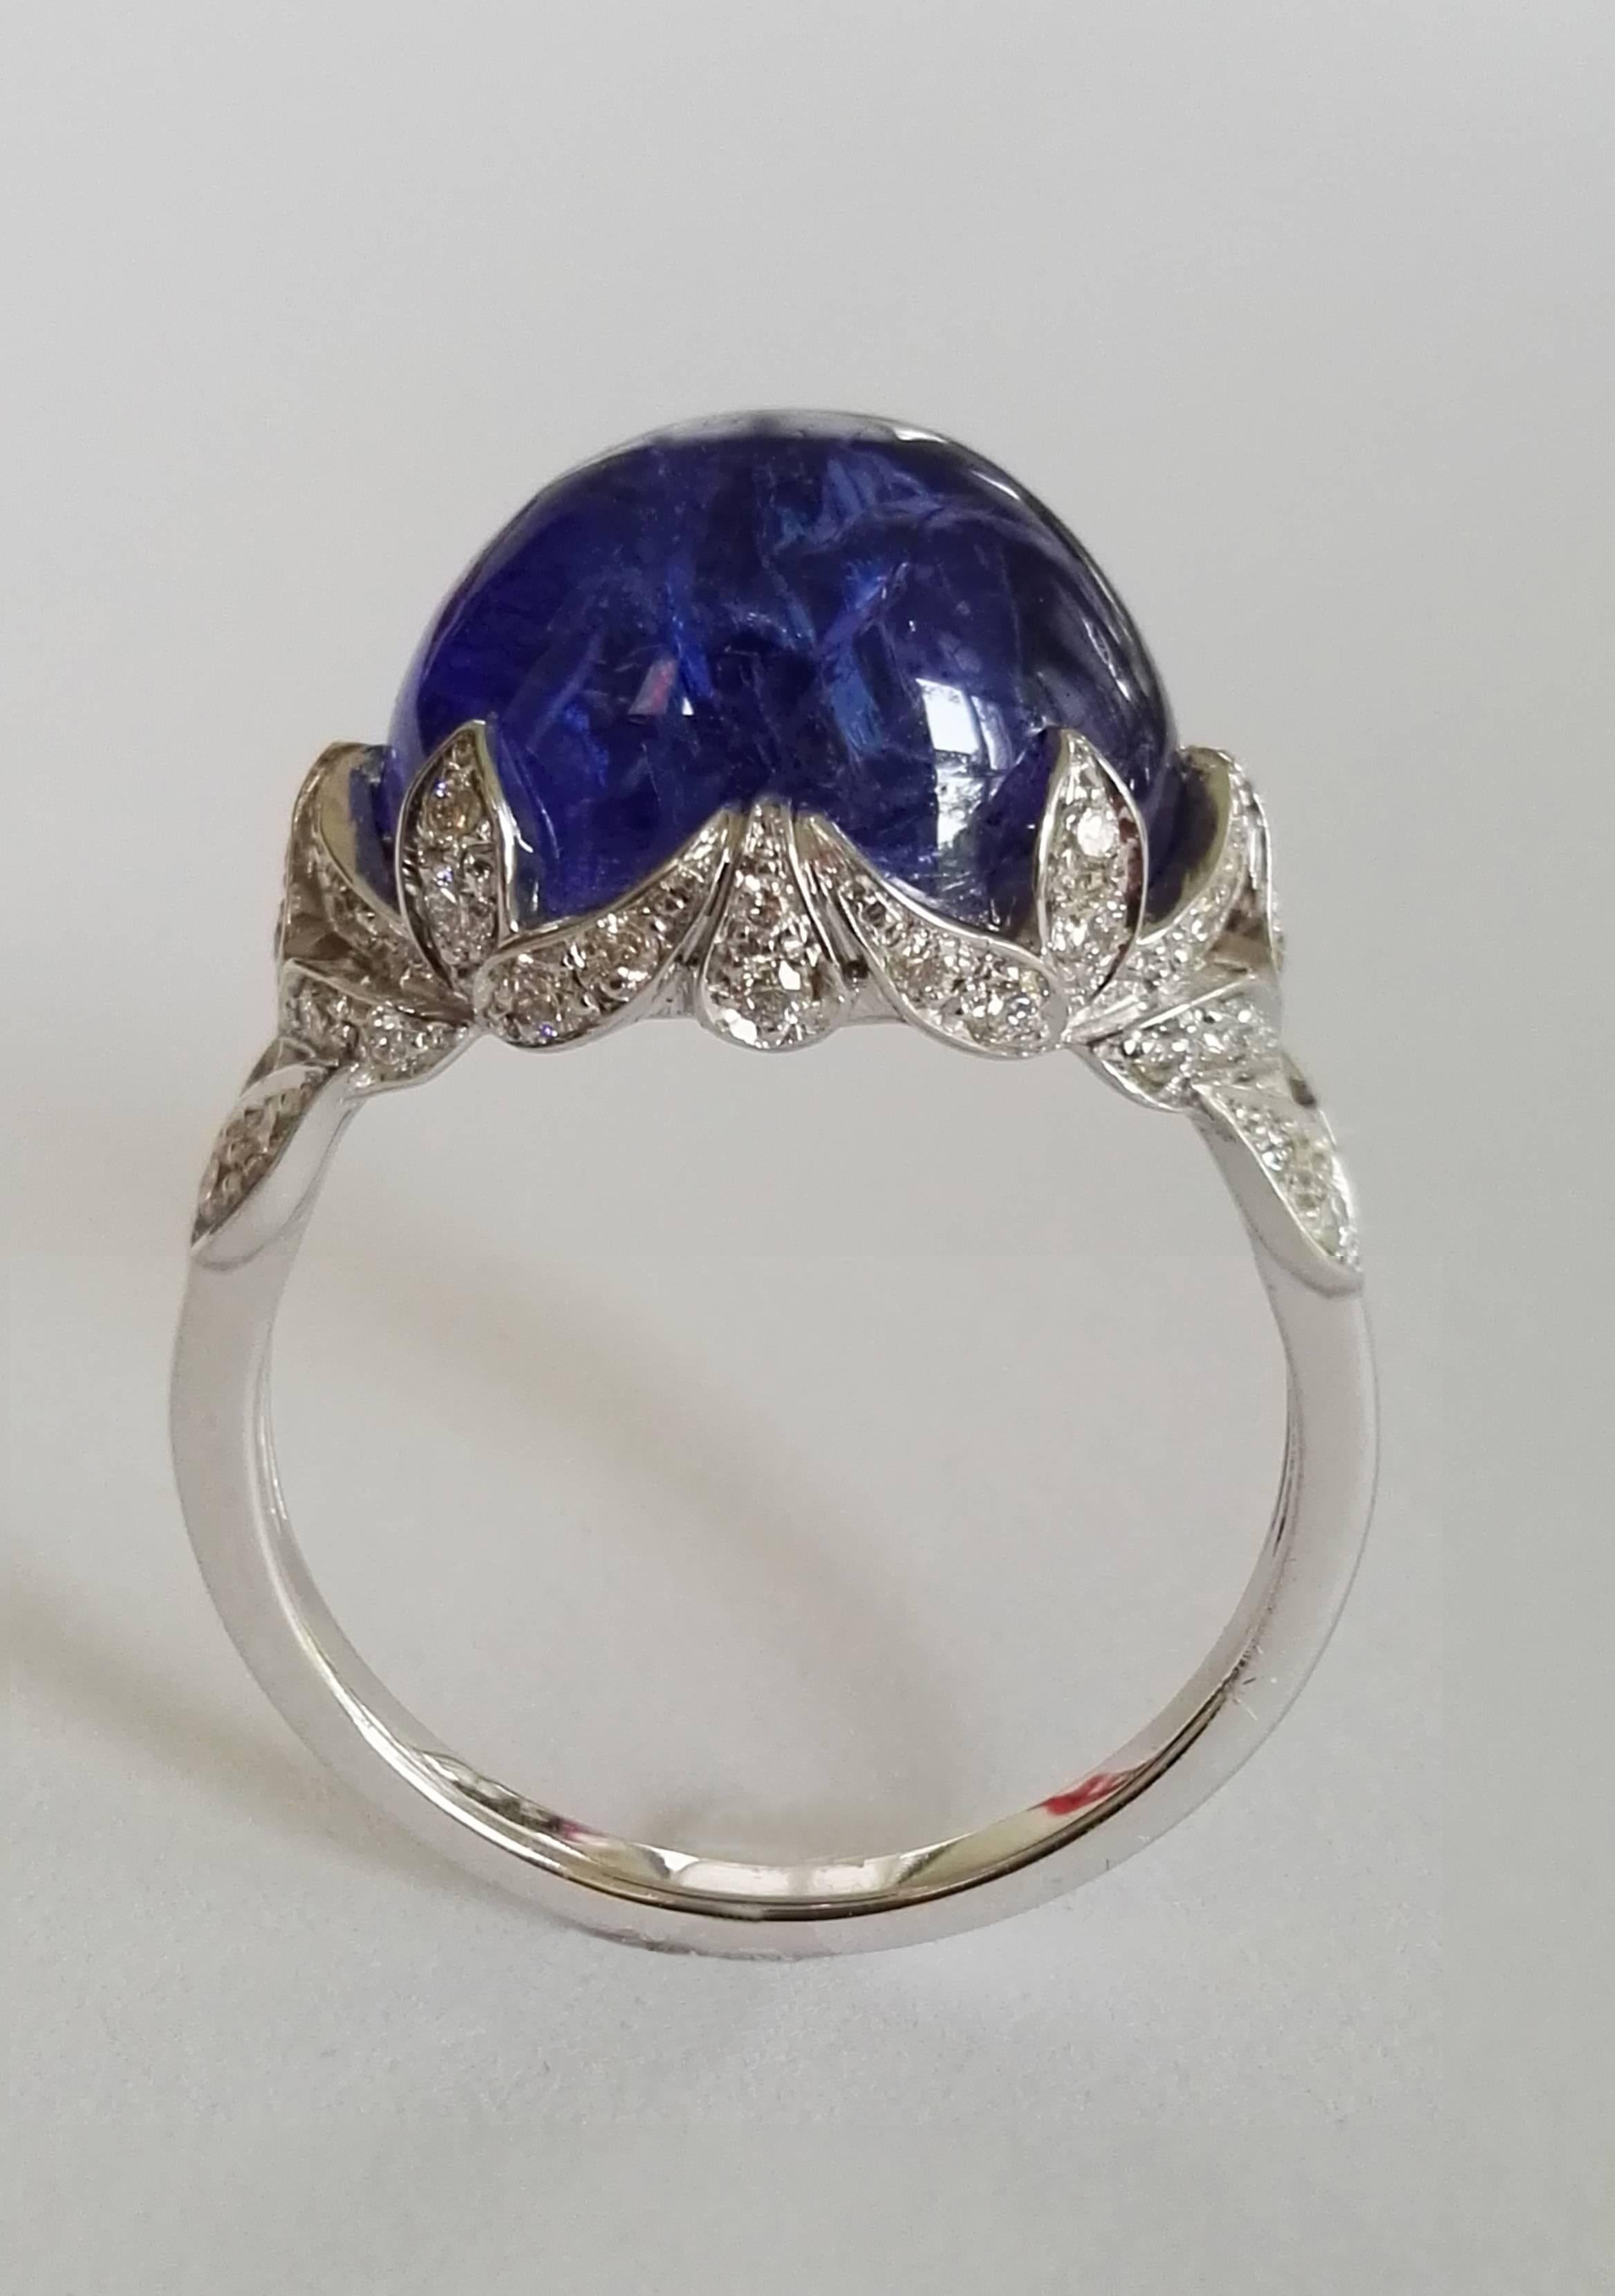 Dalben design white gold ring with an oval cabochon cut Tanzanite weight 8,70 carat and 44 white round brillant cut Diamonds weight 0,23 carats mounted in 18 k white gold. 
Head ring dimension : height 12 mm, width 16 mm.
Ring size 7 1/2 USA - 56